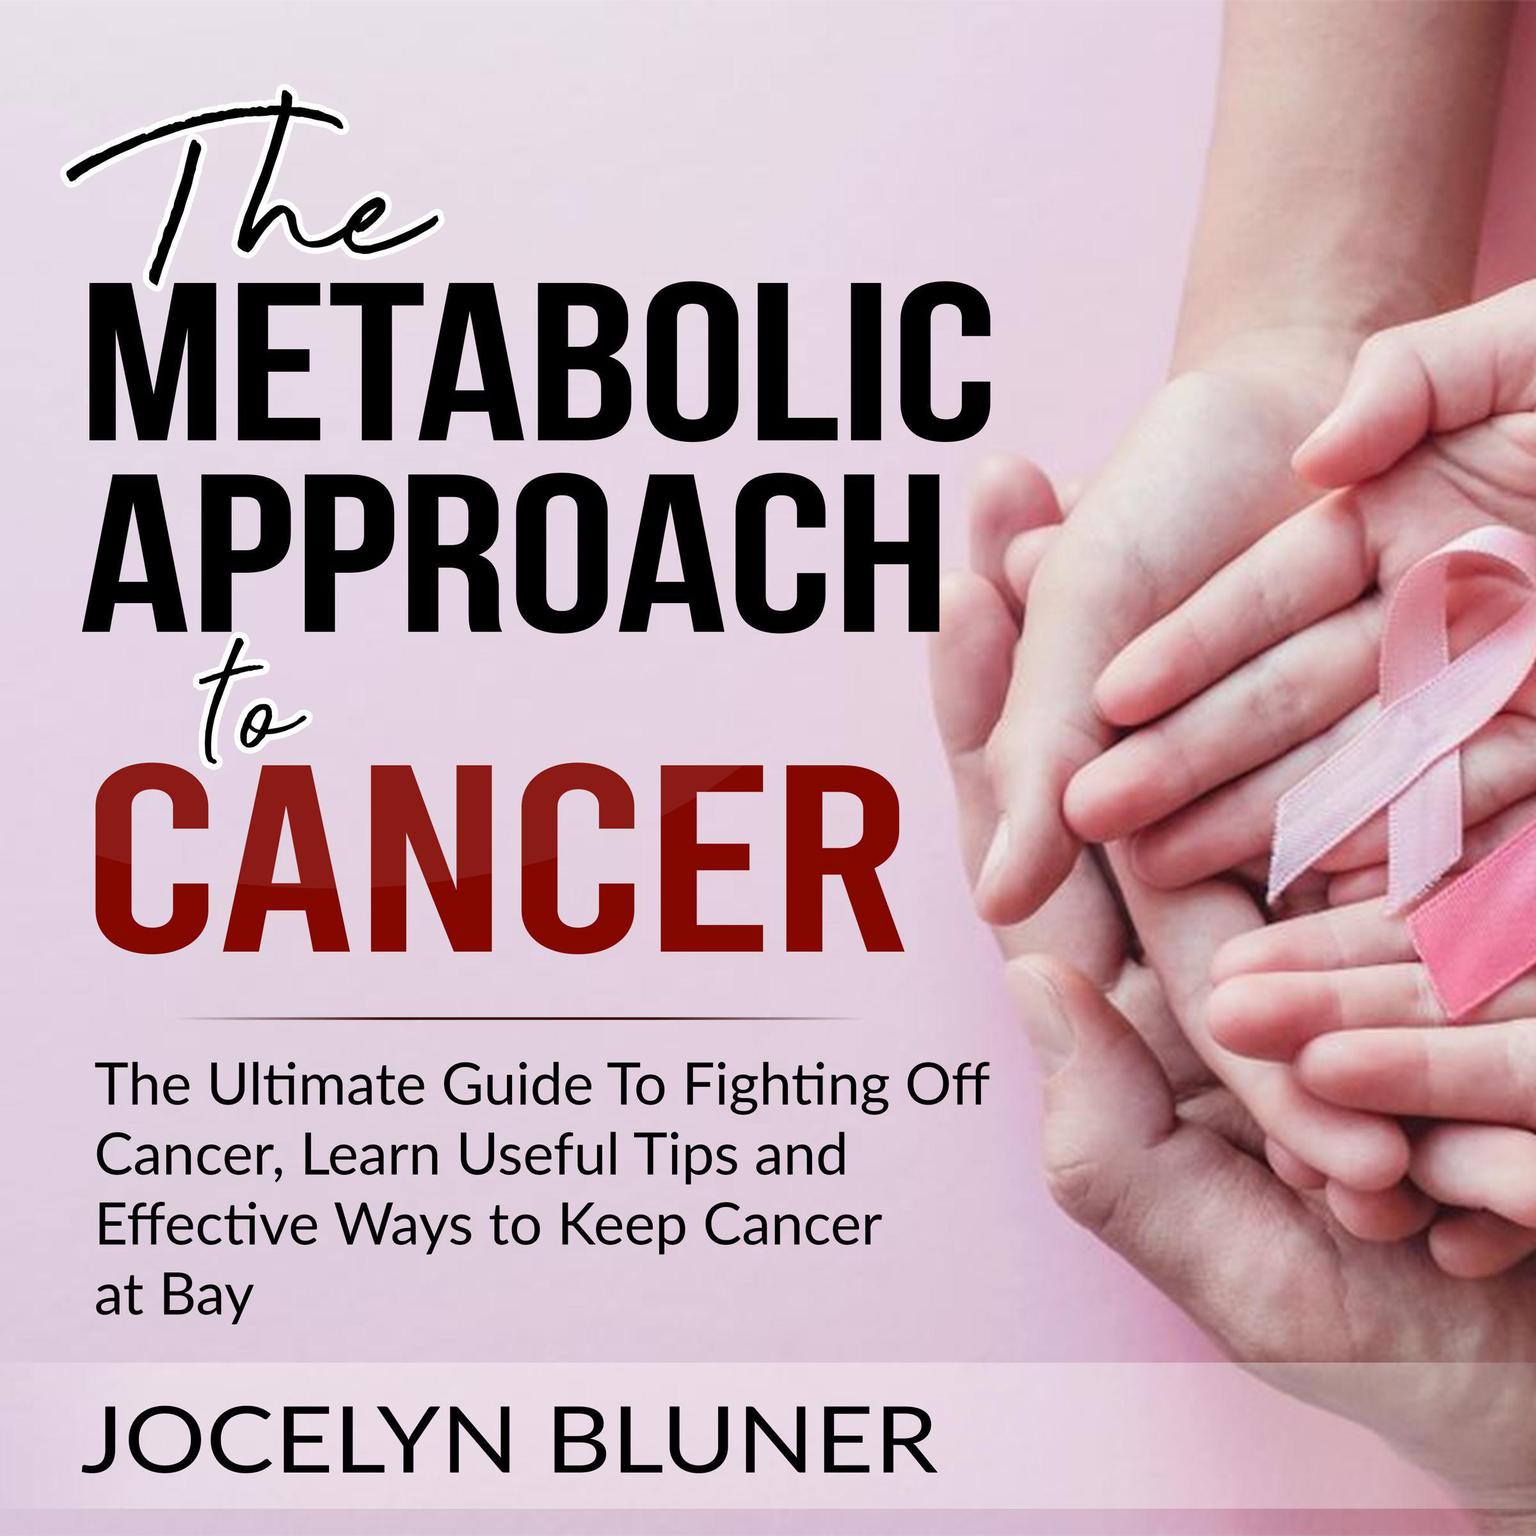 The Metabolic Approach to Cancer: The Ultimate Guide To Fighting Off Cancer, Learn Useful Tips and Effective Ways to Keep Cancer at Bay Audiobook, by Jocelyn Bluner